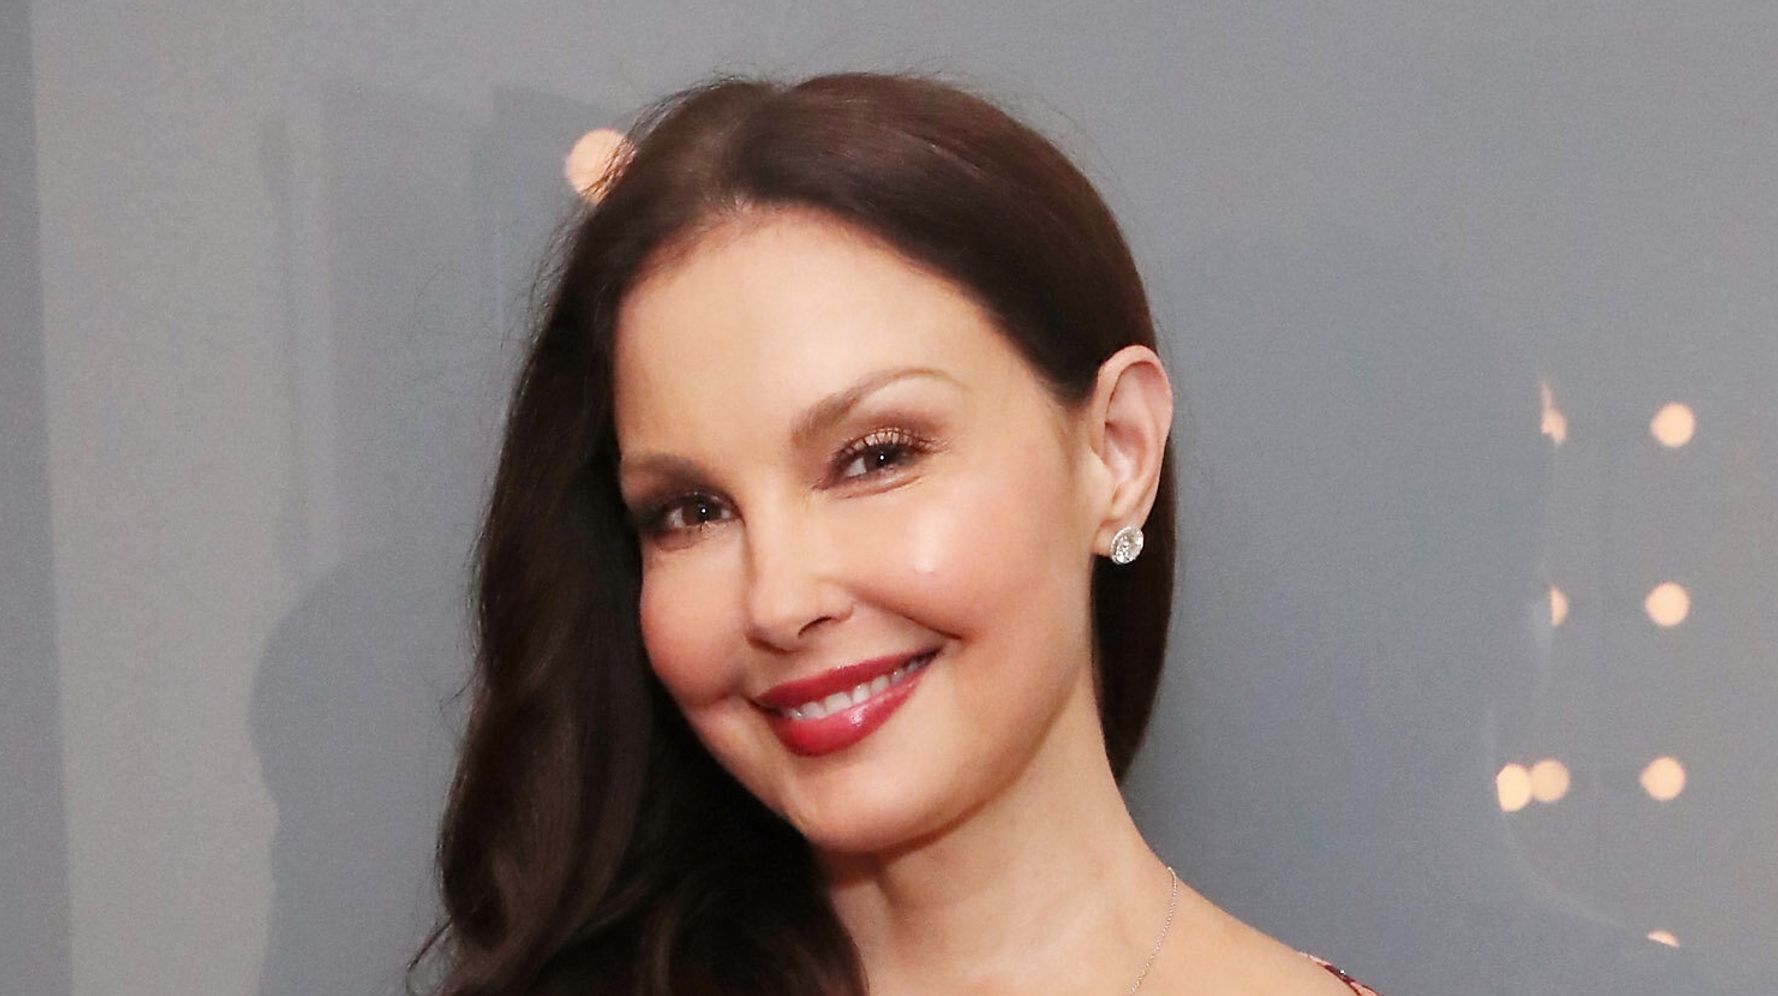 Ashley Judd Says She Can Walk Again Nearly 6 Months After Shattering Leg